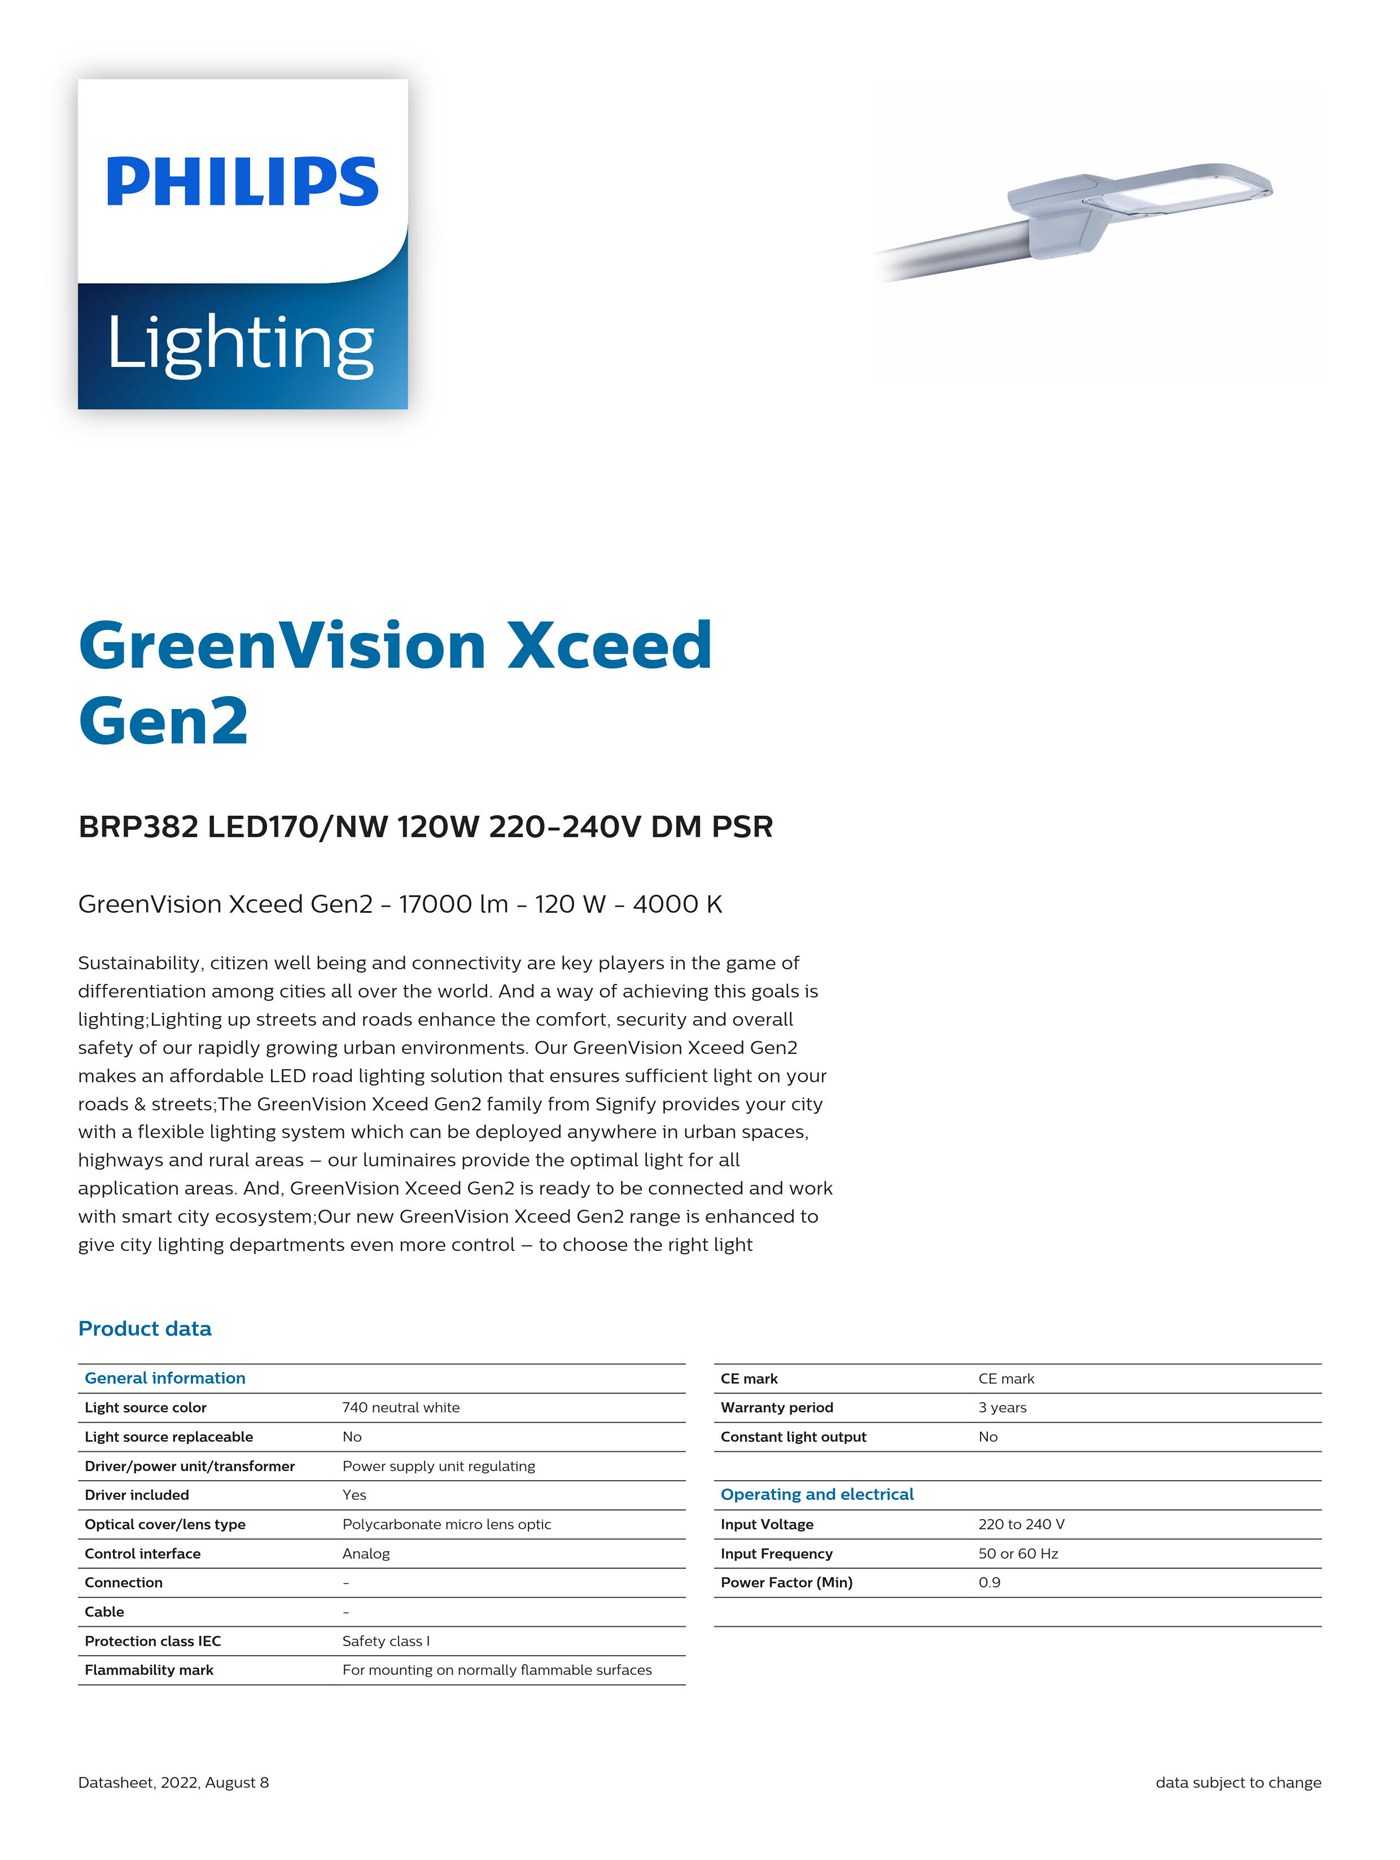 PHILIPS GreenVision Xceed Gen2 BRP382 LED170/NW 120W 220-240V DM PSR 911401875598